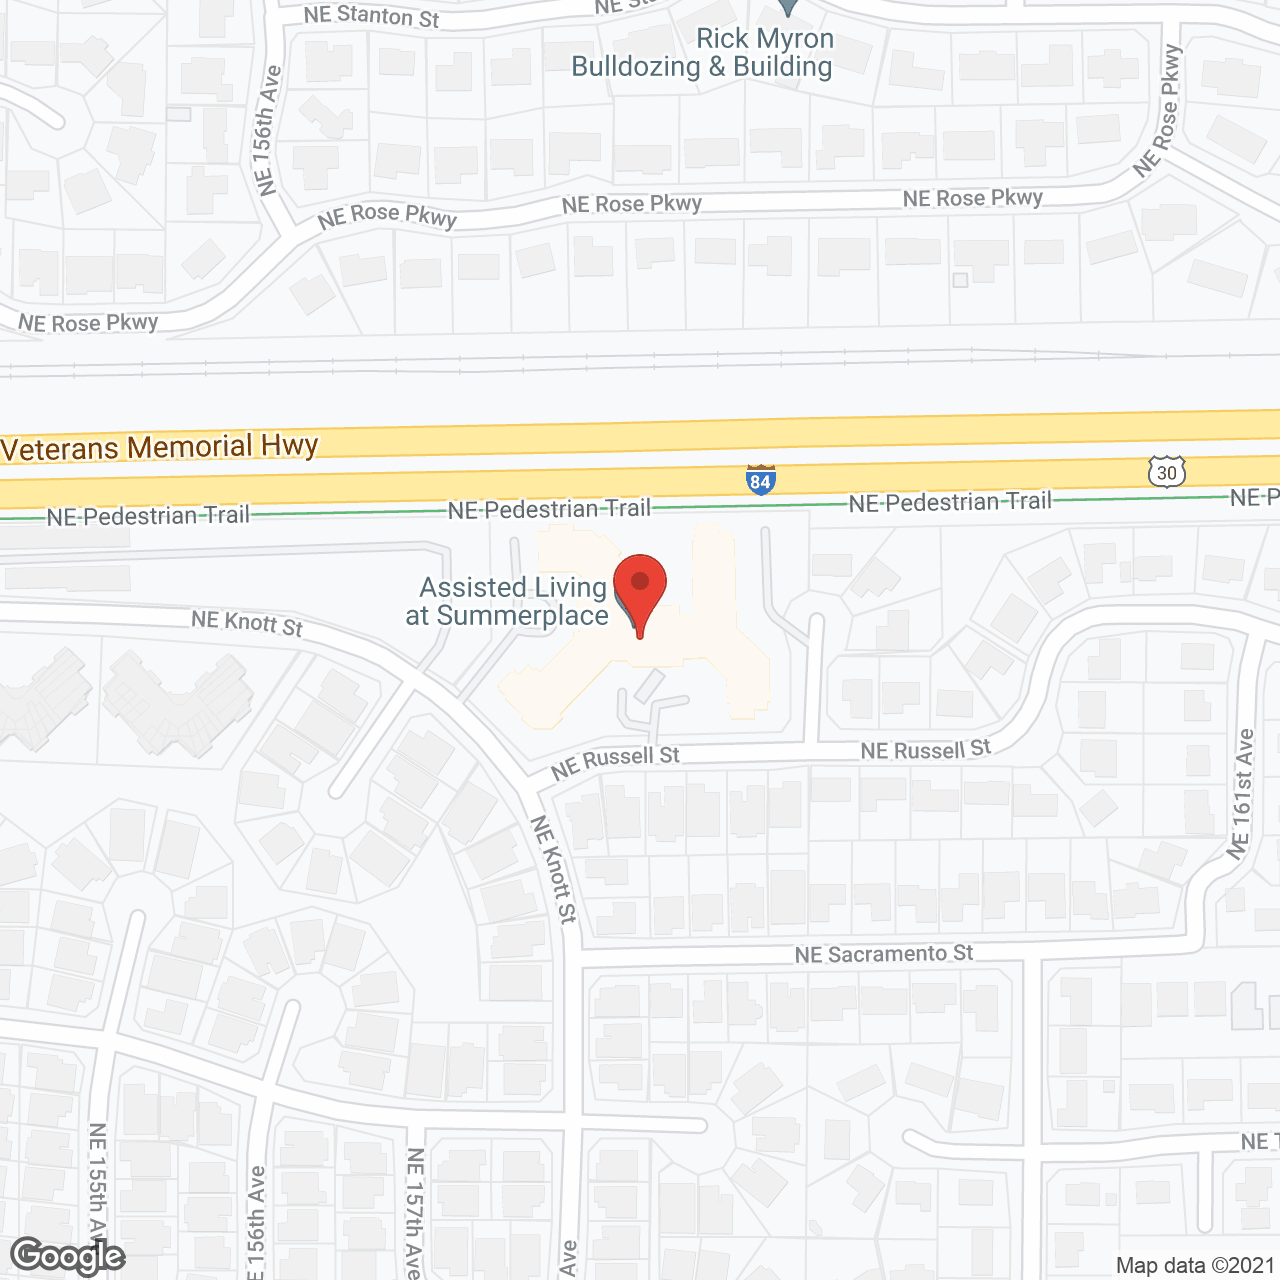 Assisted Living at Summerplace in google map